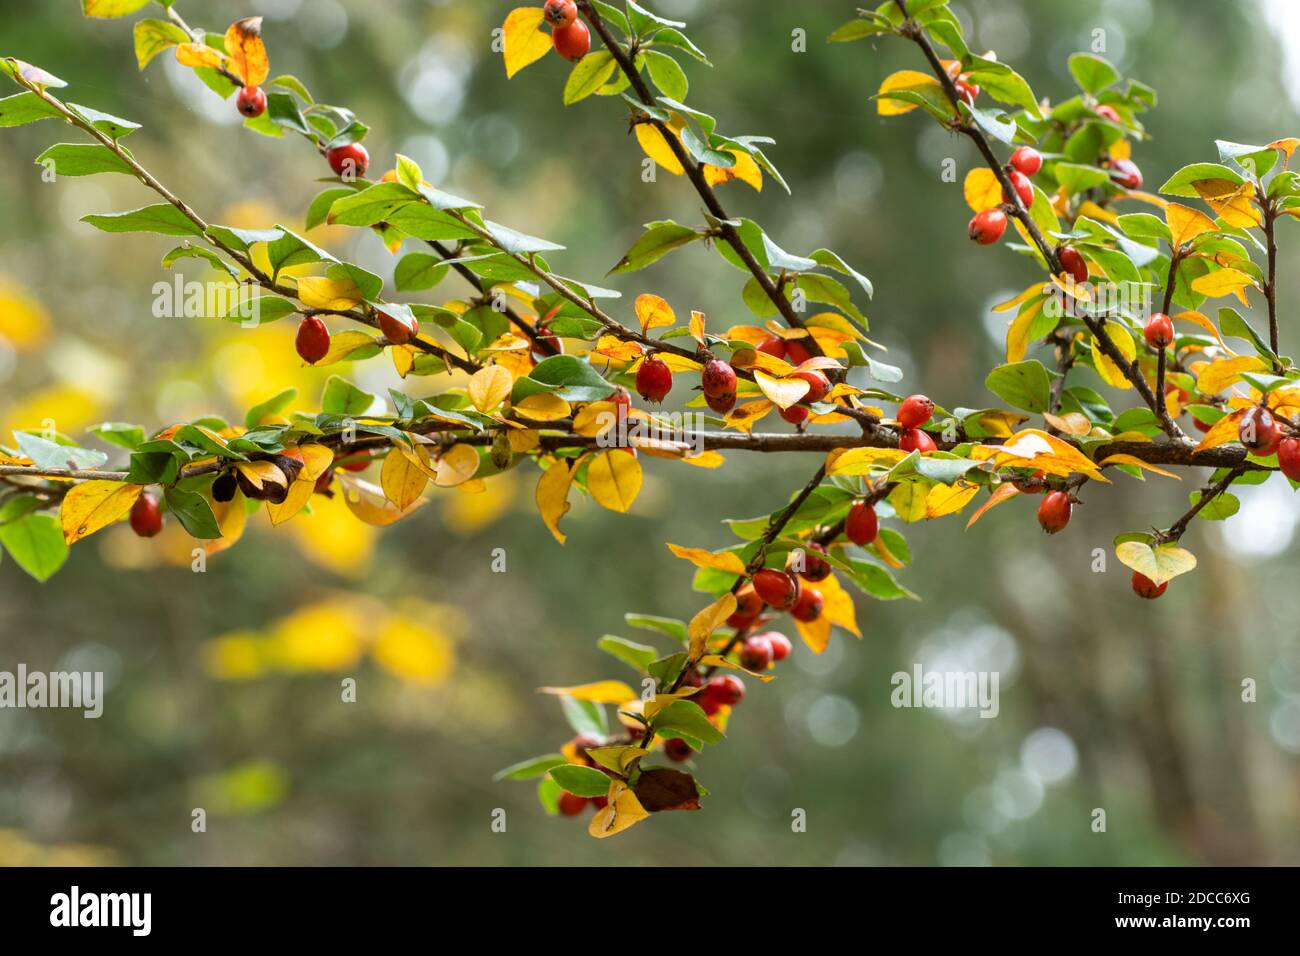 Himalyan cotoneaster (Cotoneaster simonsii) with orange berries and colourful foliage during autumn or November, UK Stock Photo